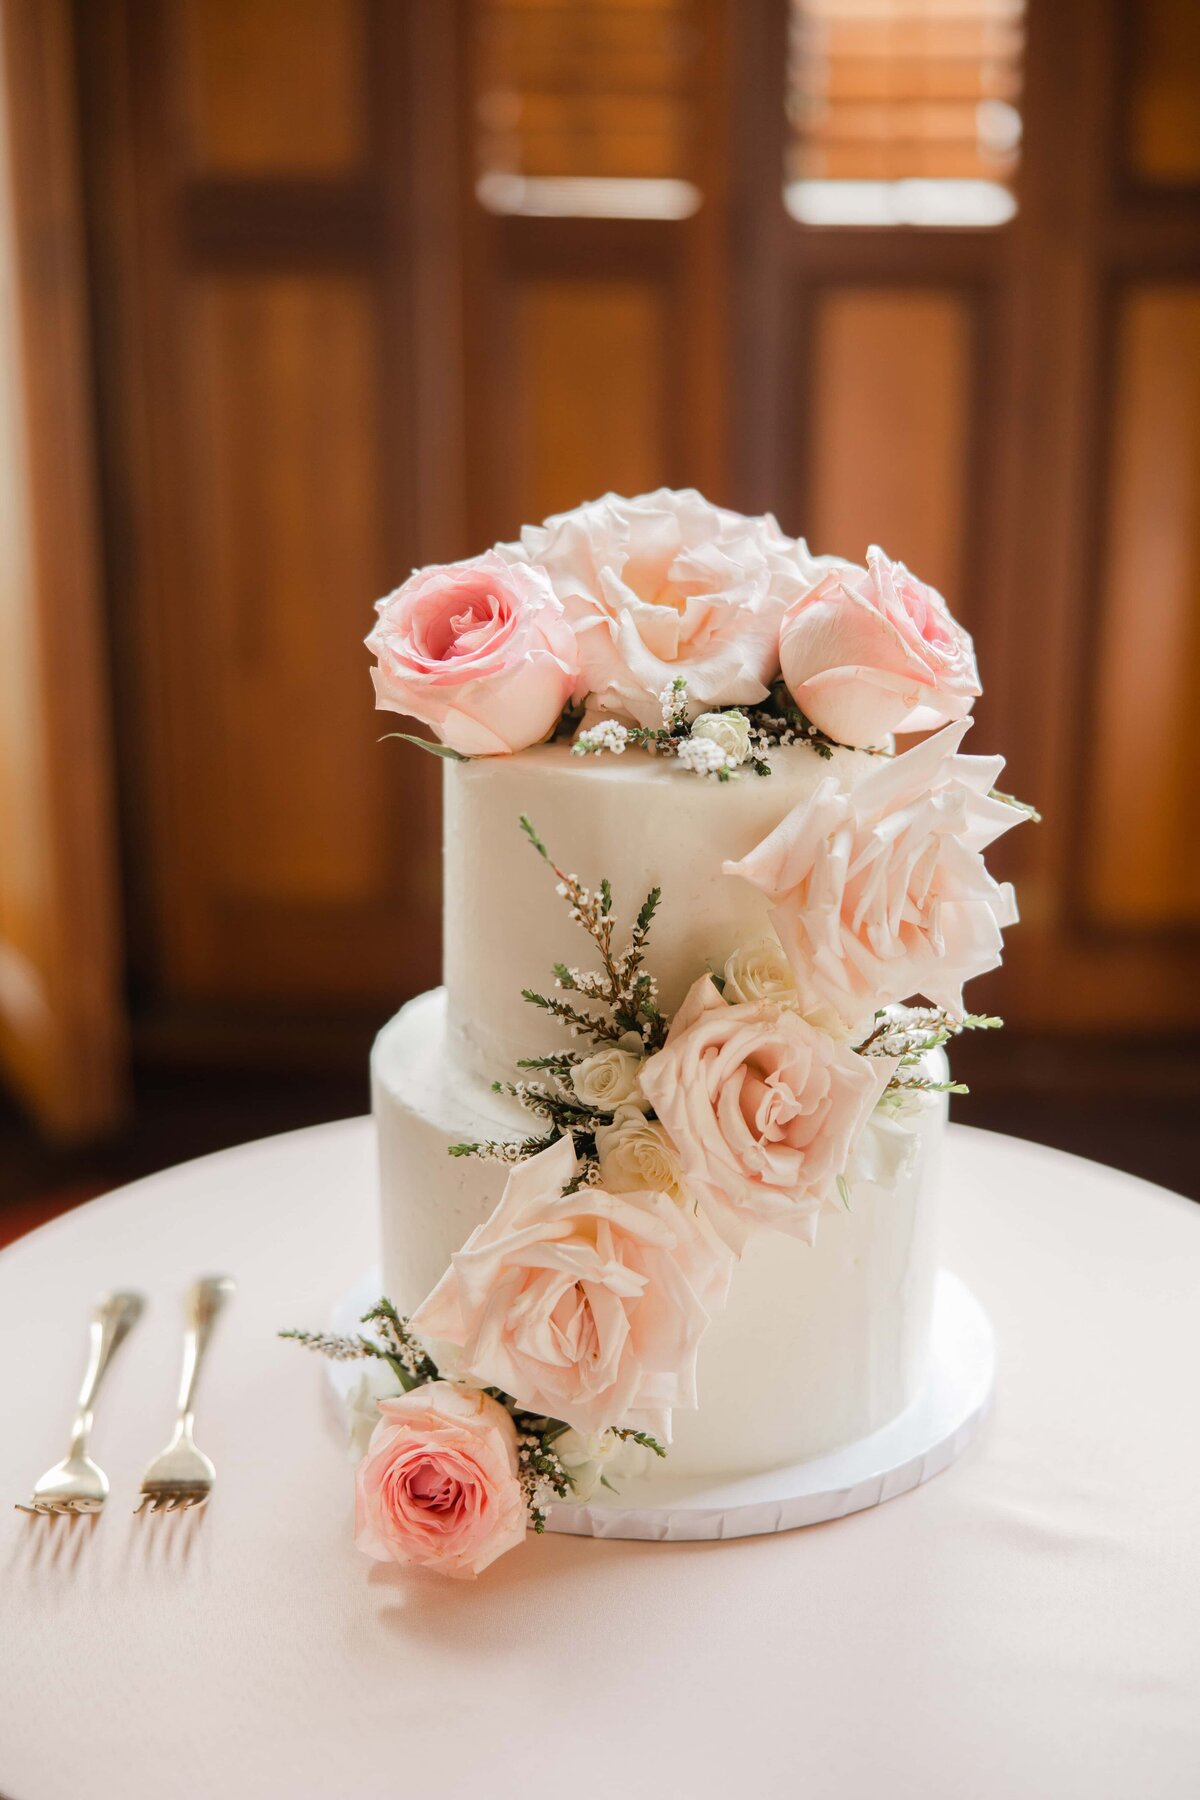 Two-tiered white wedding cake adorned with pink roses and baby's breath on a table at a Park Farm Winery wedding, with cake servers nearby.